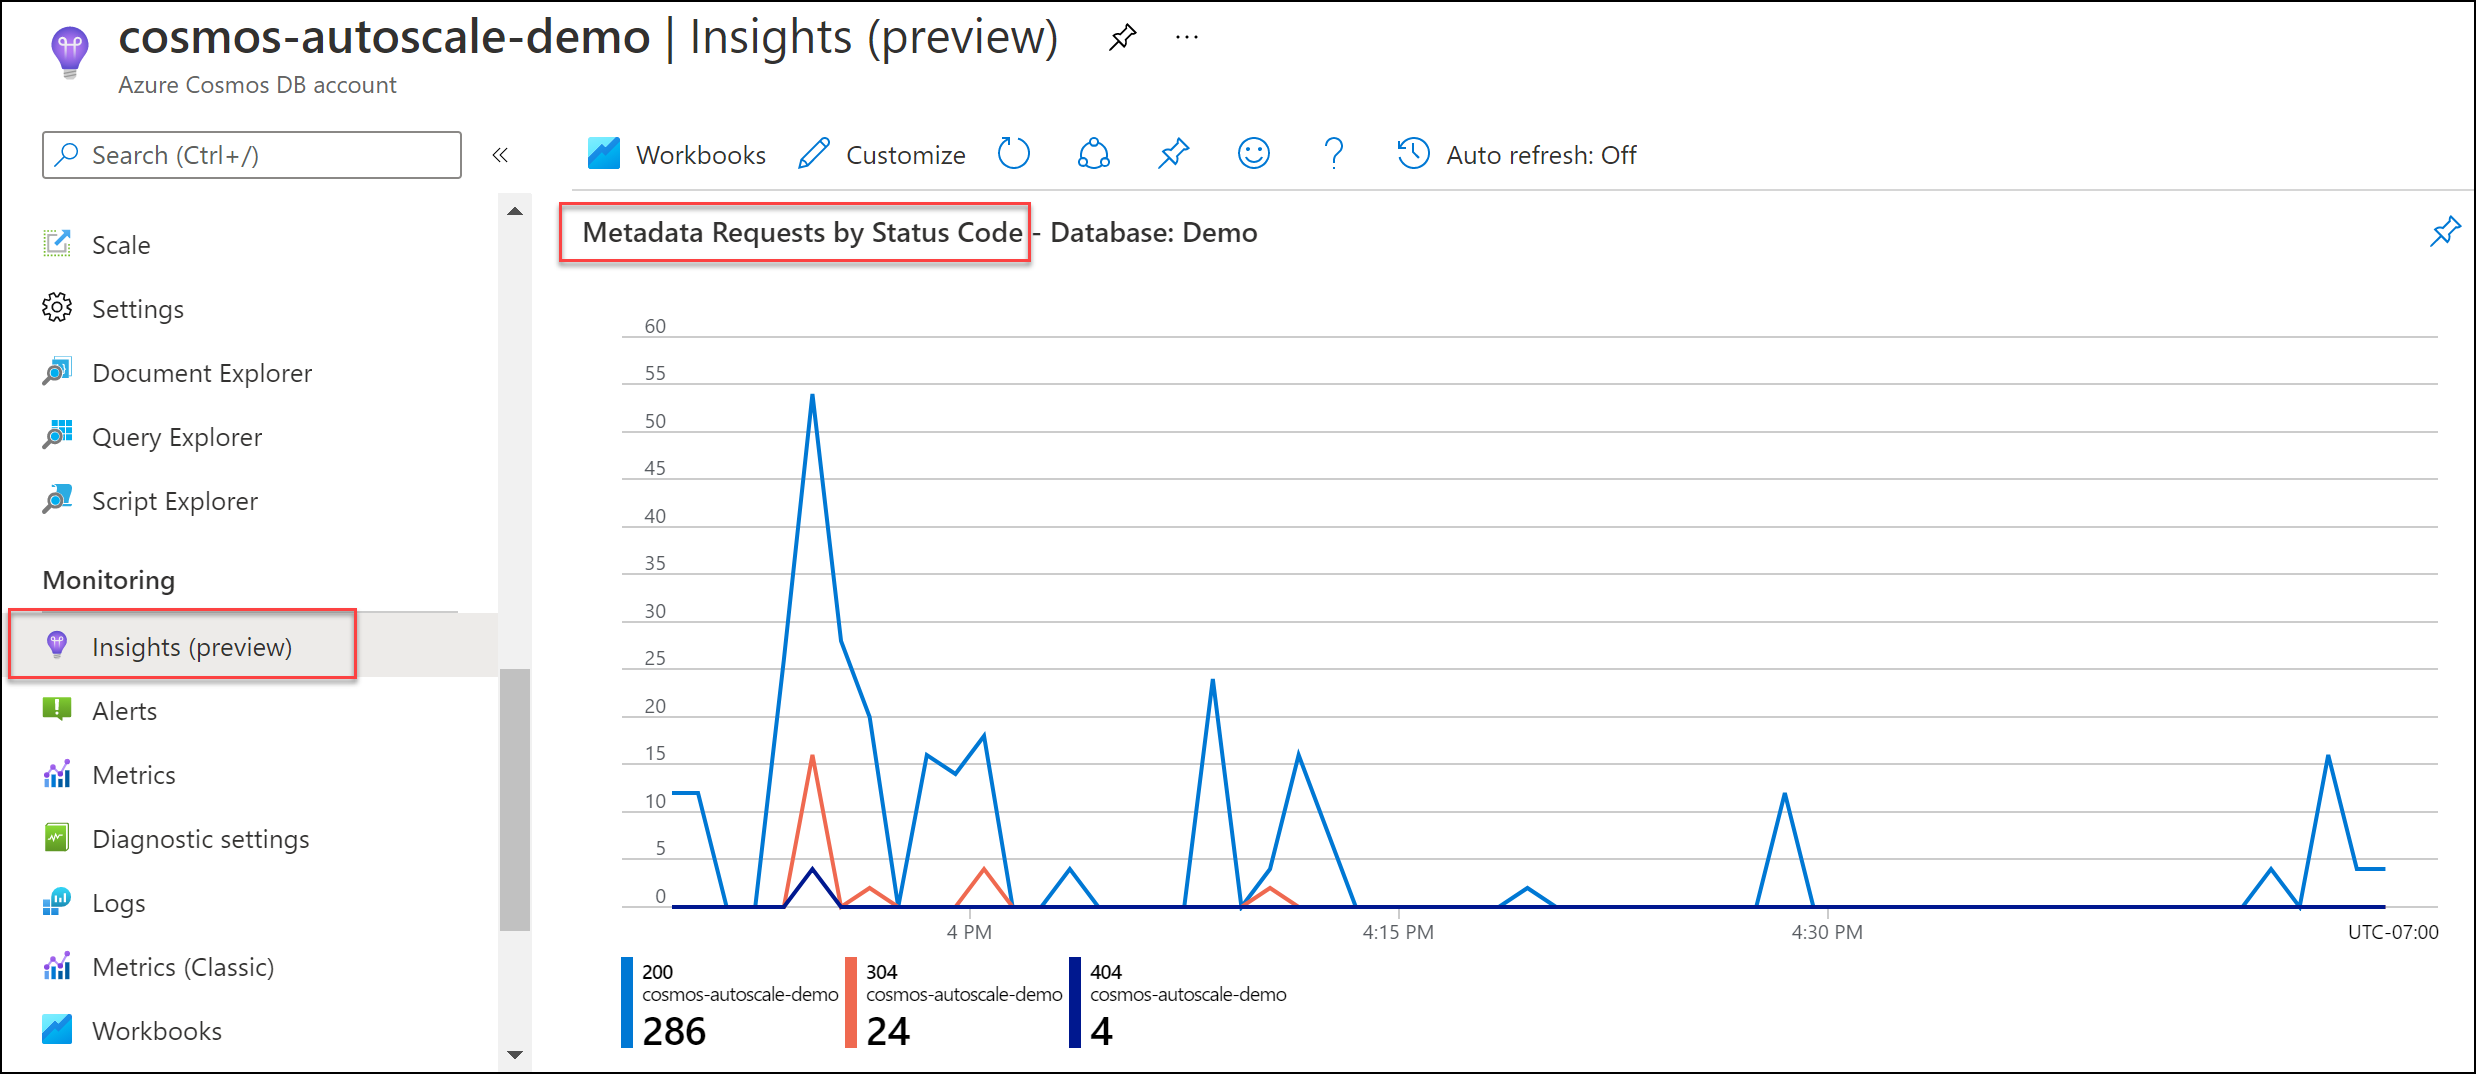 Metadata requests by status code chart in Insights.